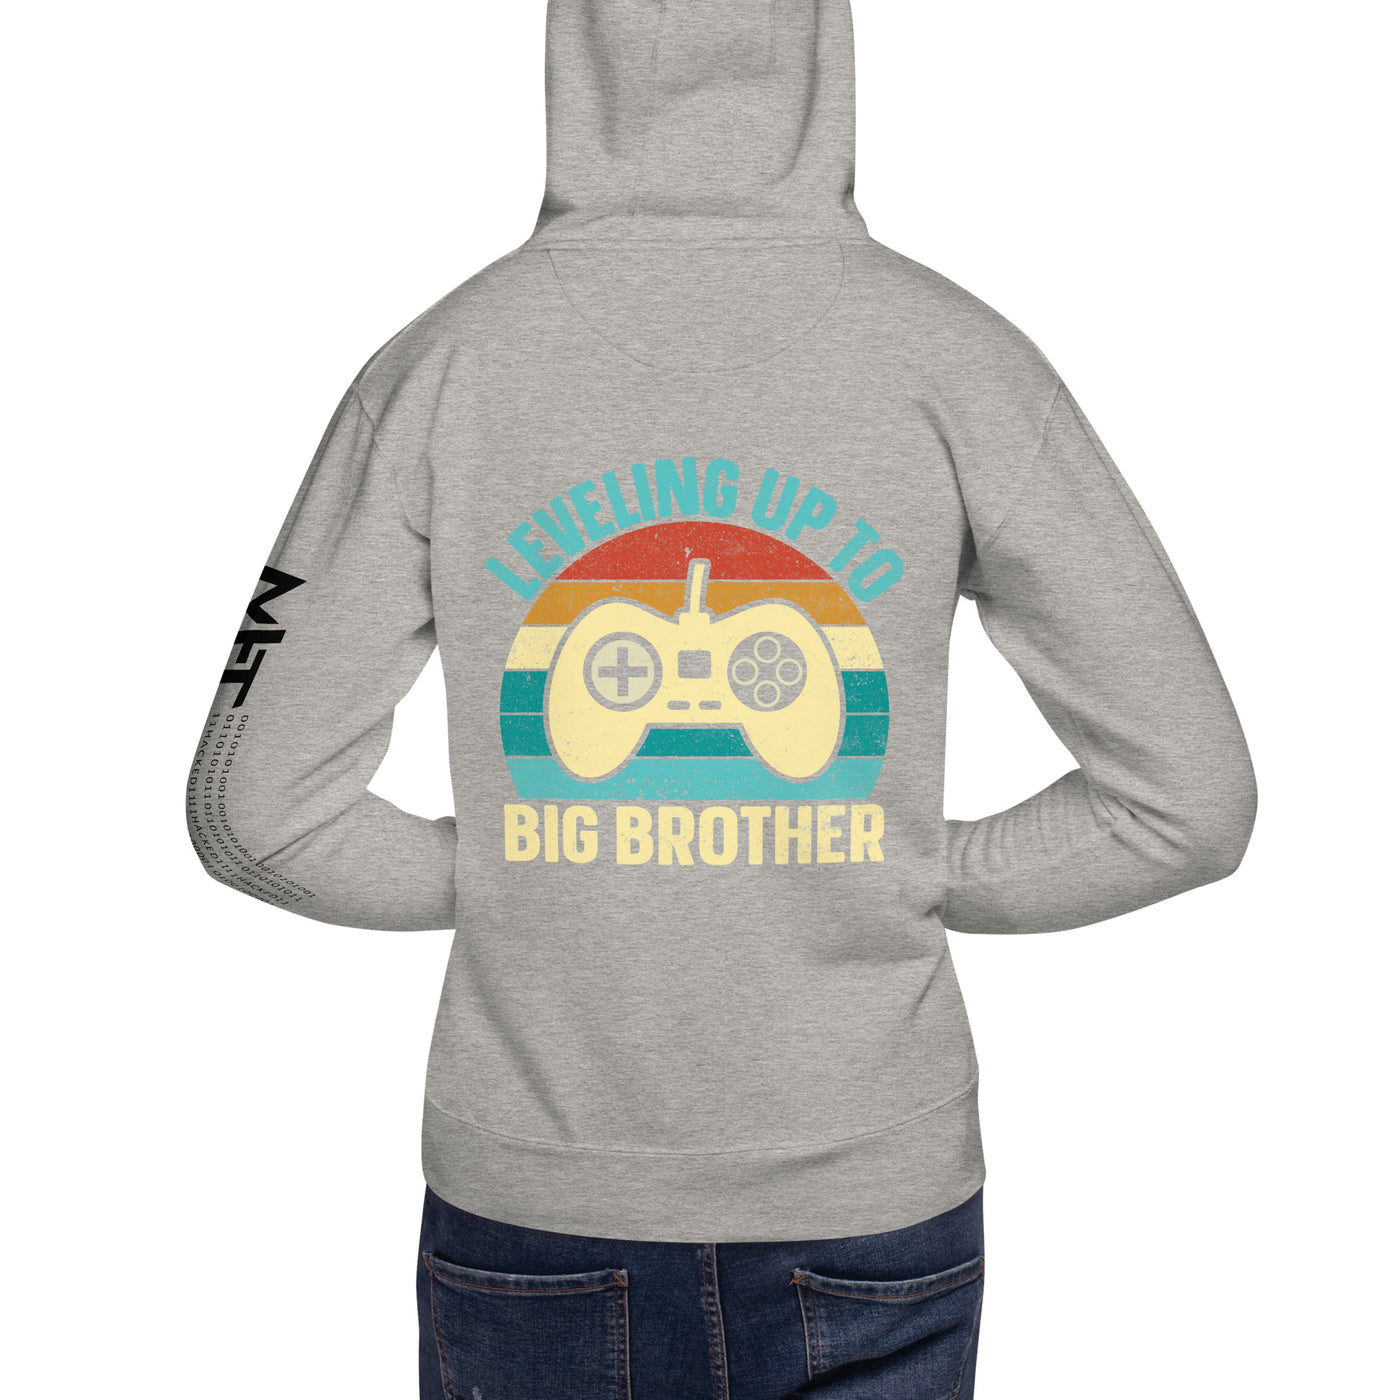 Levelling up to Big Brother V2 in Darker Shade - Unisex Hoodie ( Back Print )